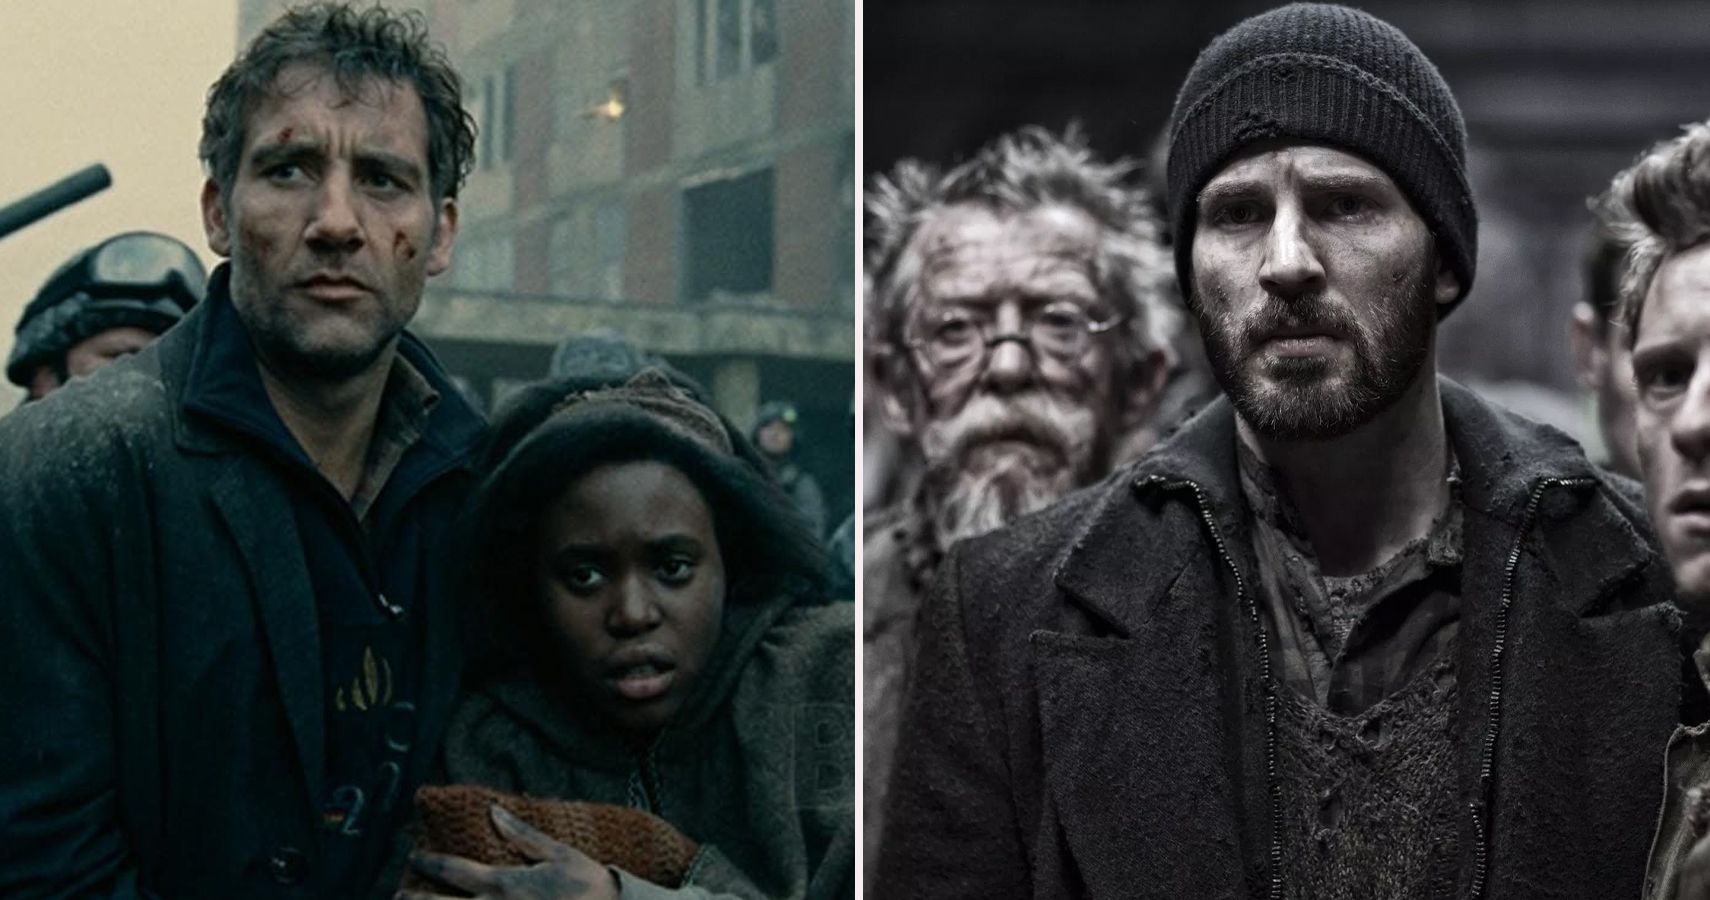 10 Sci Fi Movies To Watch If You Like Children Of Men